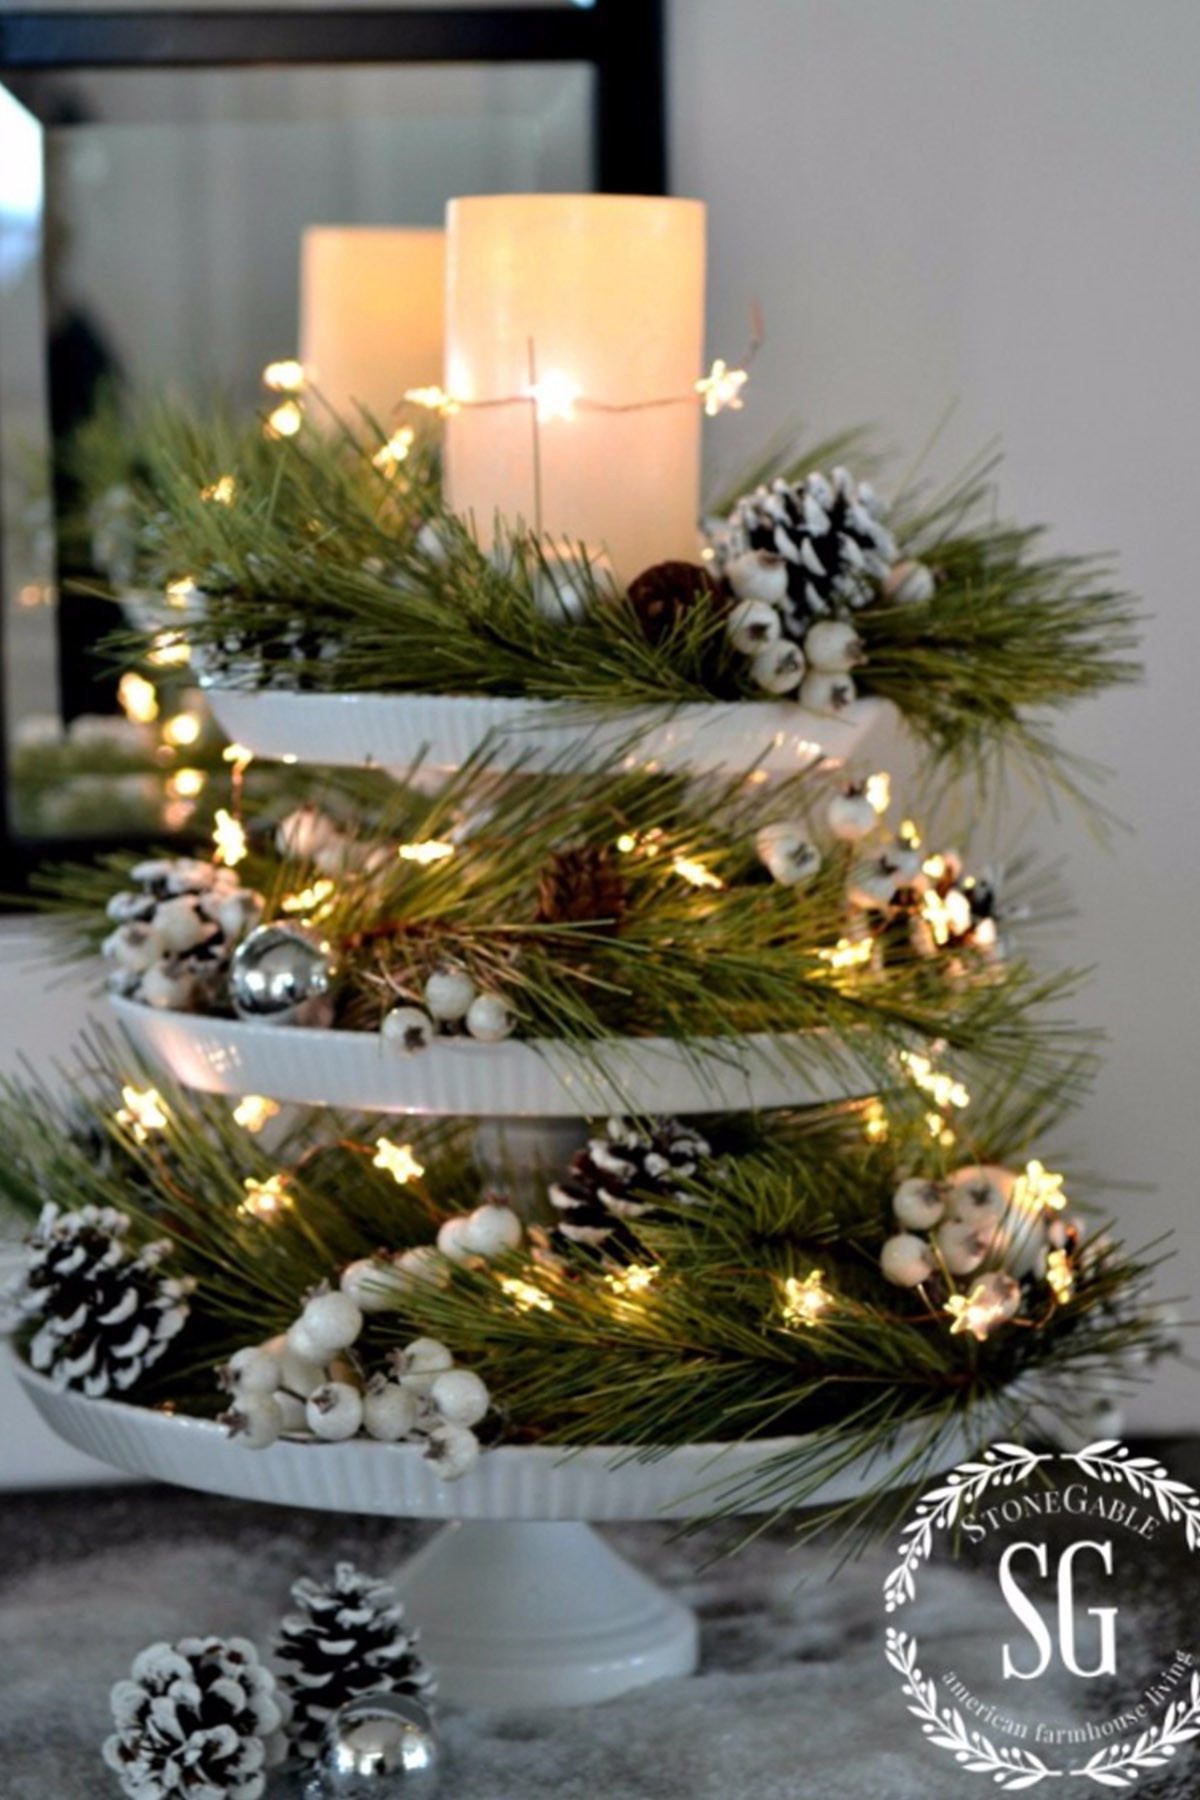 Simple Christmas Table Decorations
 32 Christmas Table Decorations & Centerpieces Ideas for